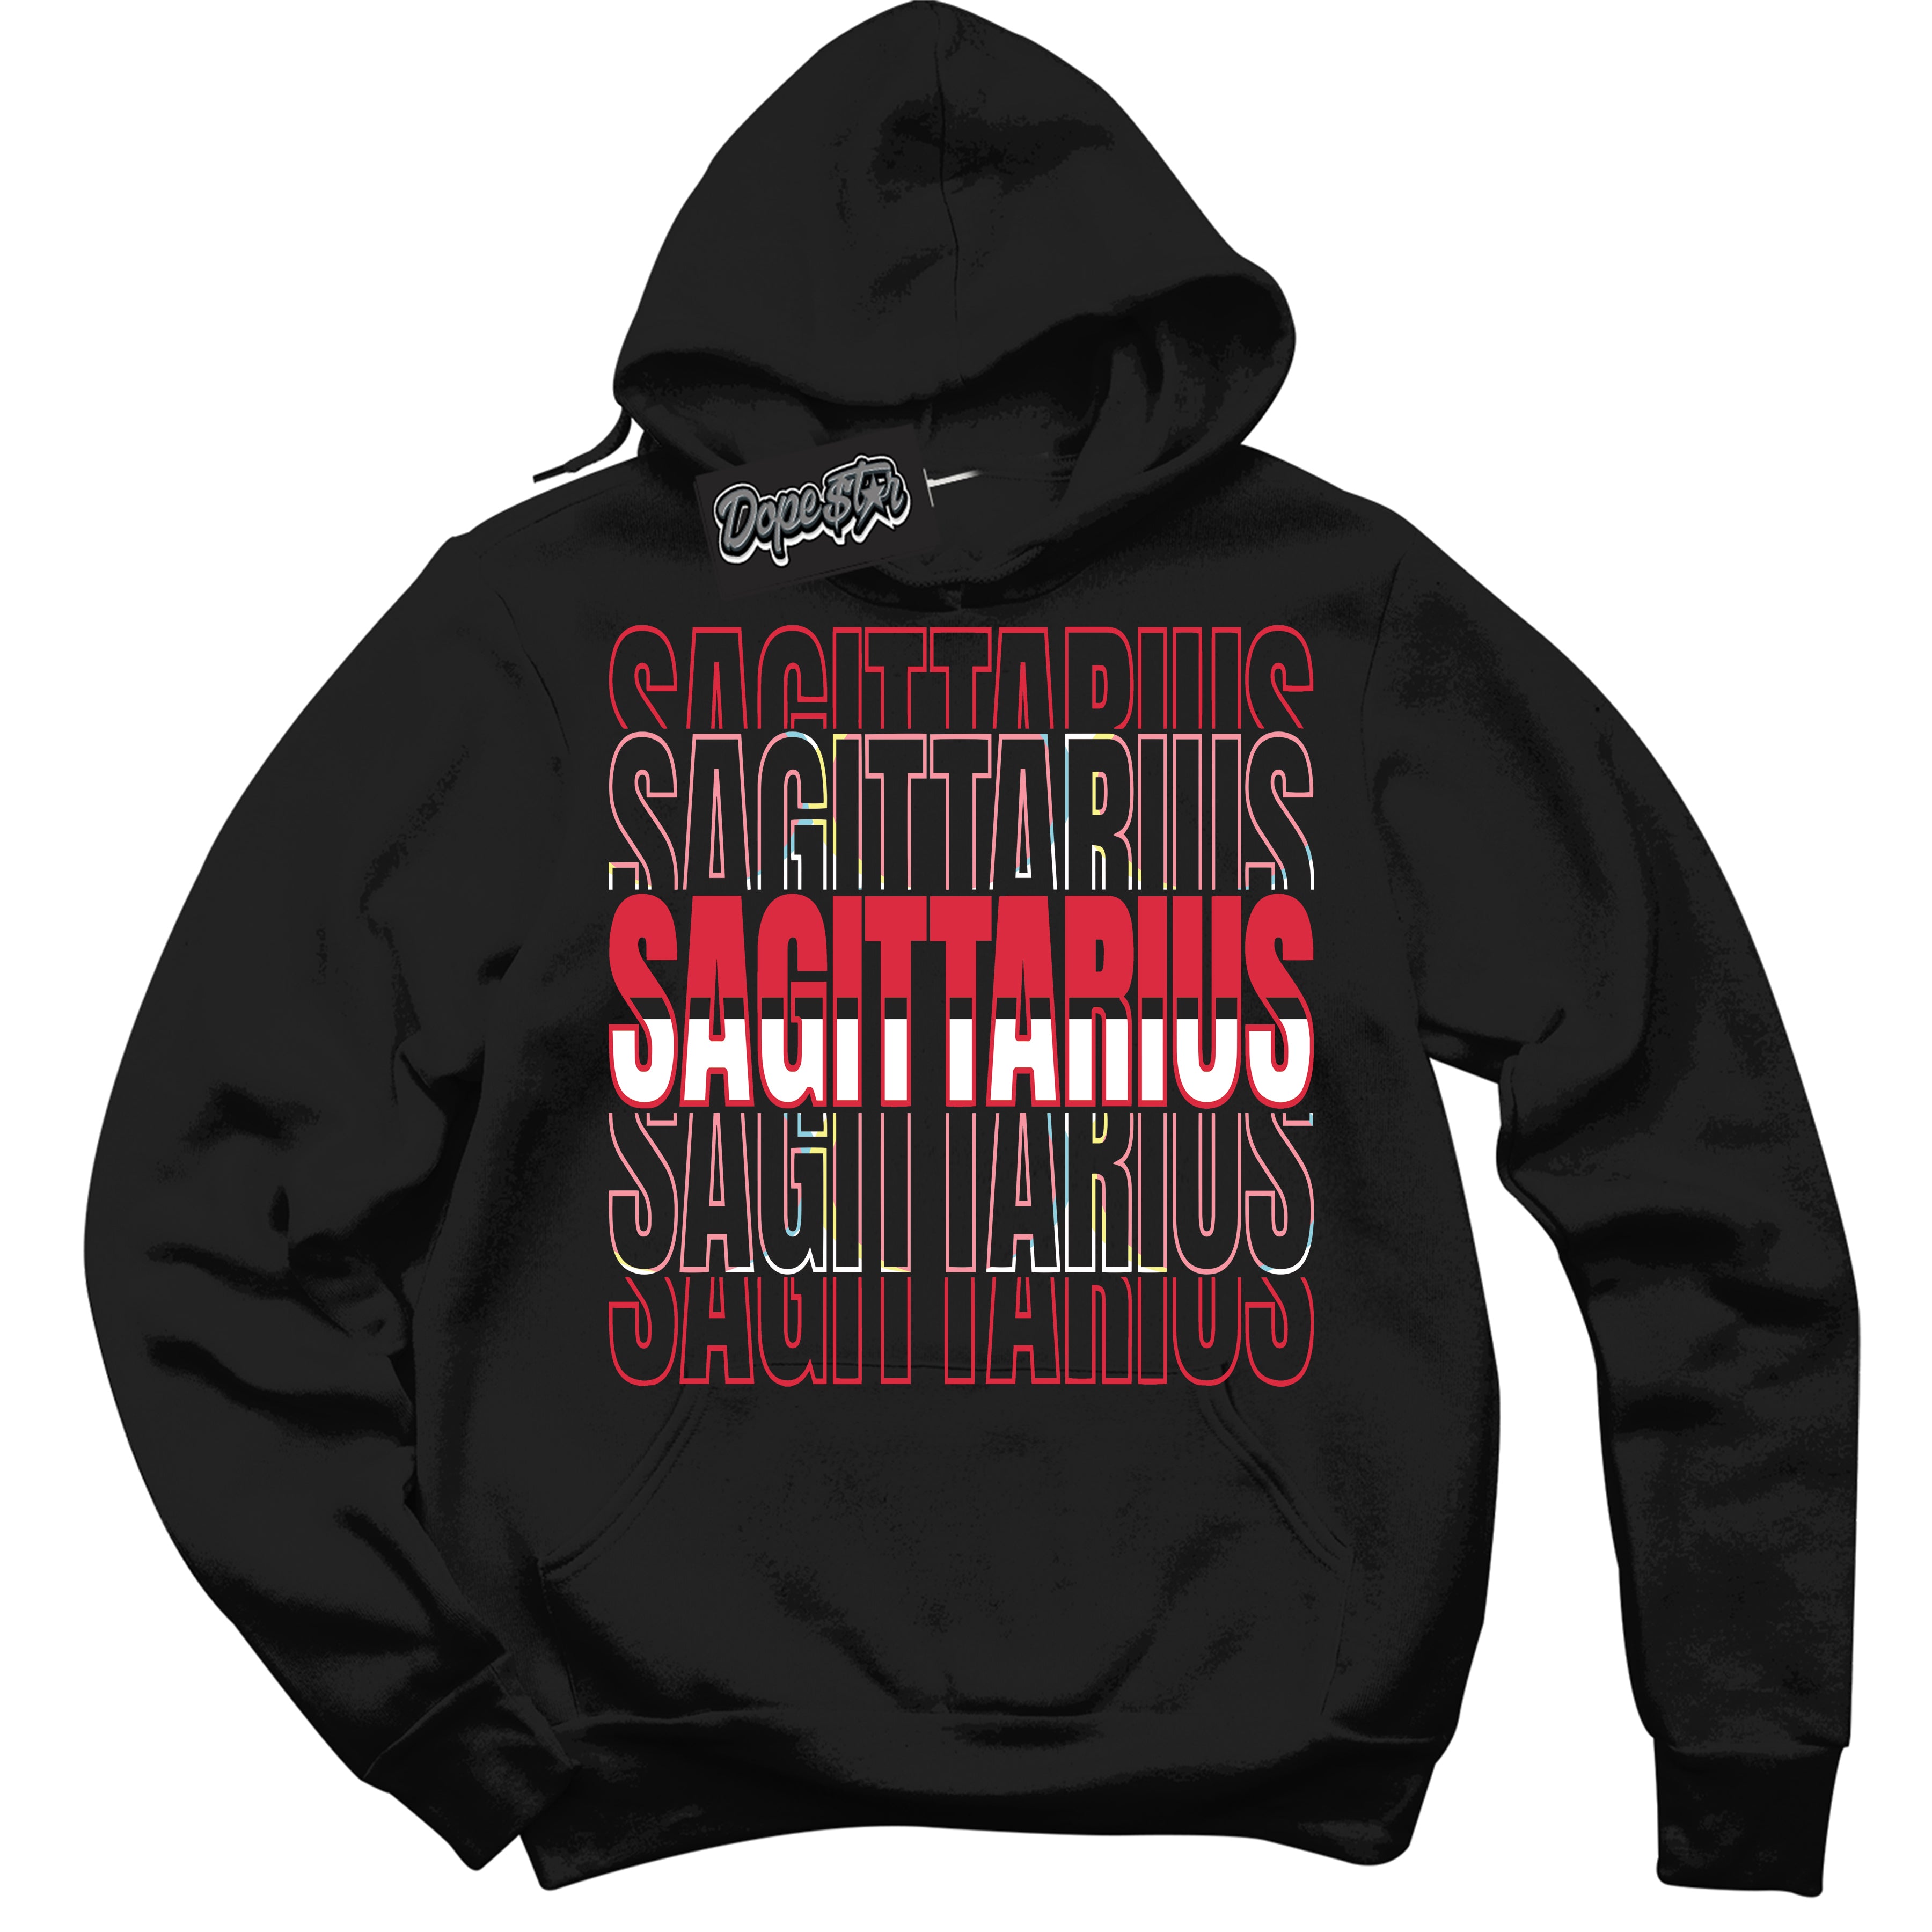 Cool Black Graphic DopeStar Hoodie with “ Sagittarius “ print, that perfectly matches Spider-Verse 1s sneakers